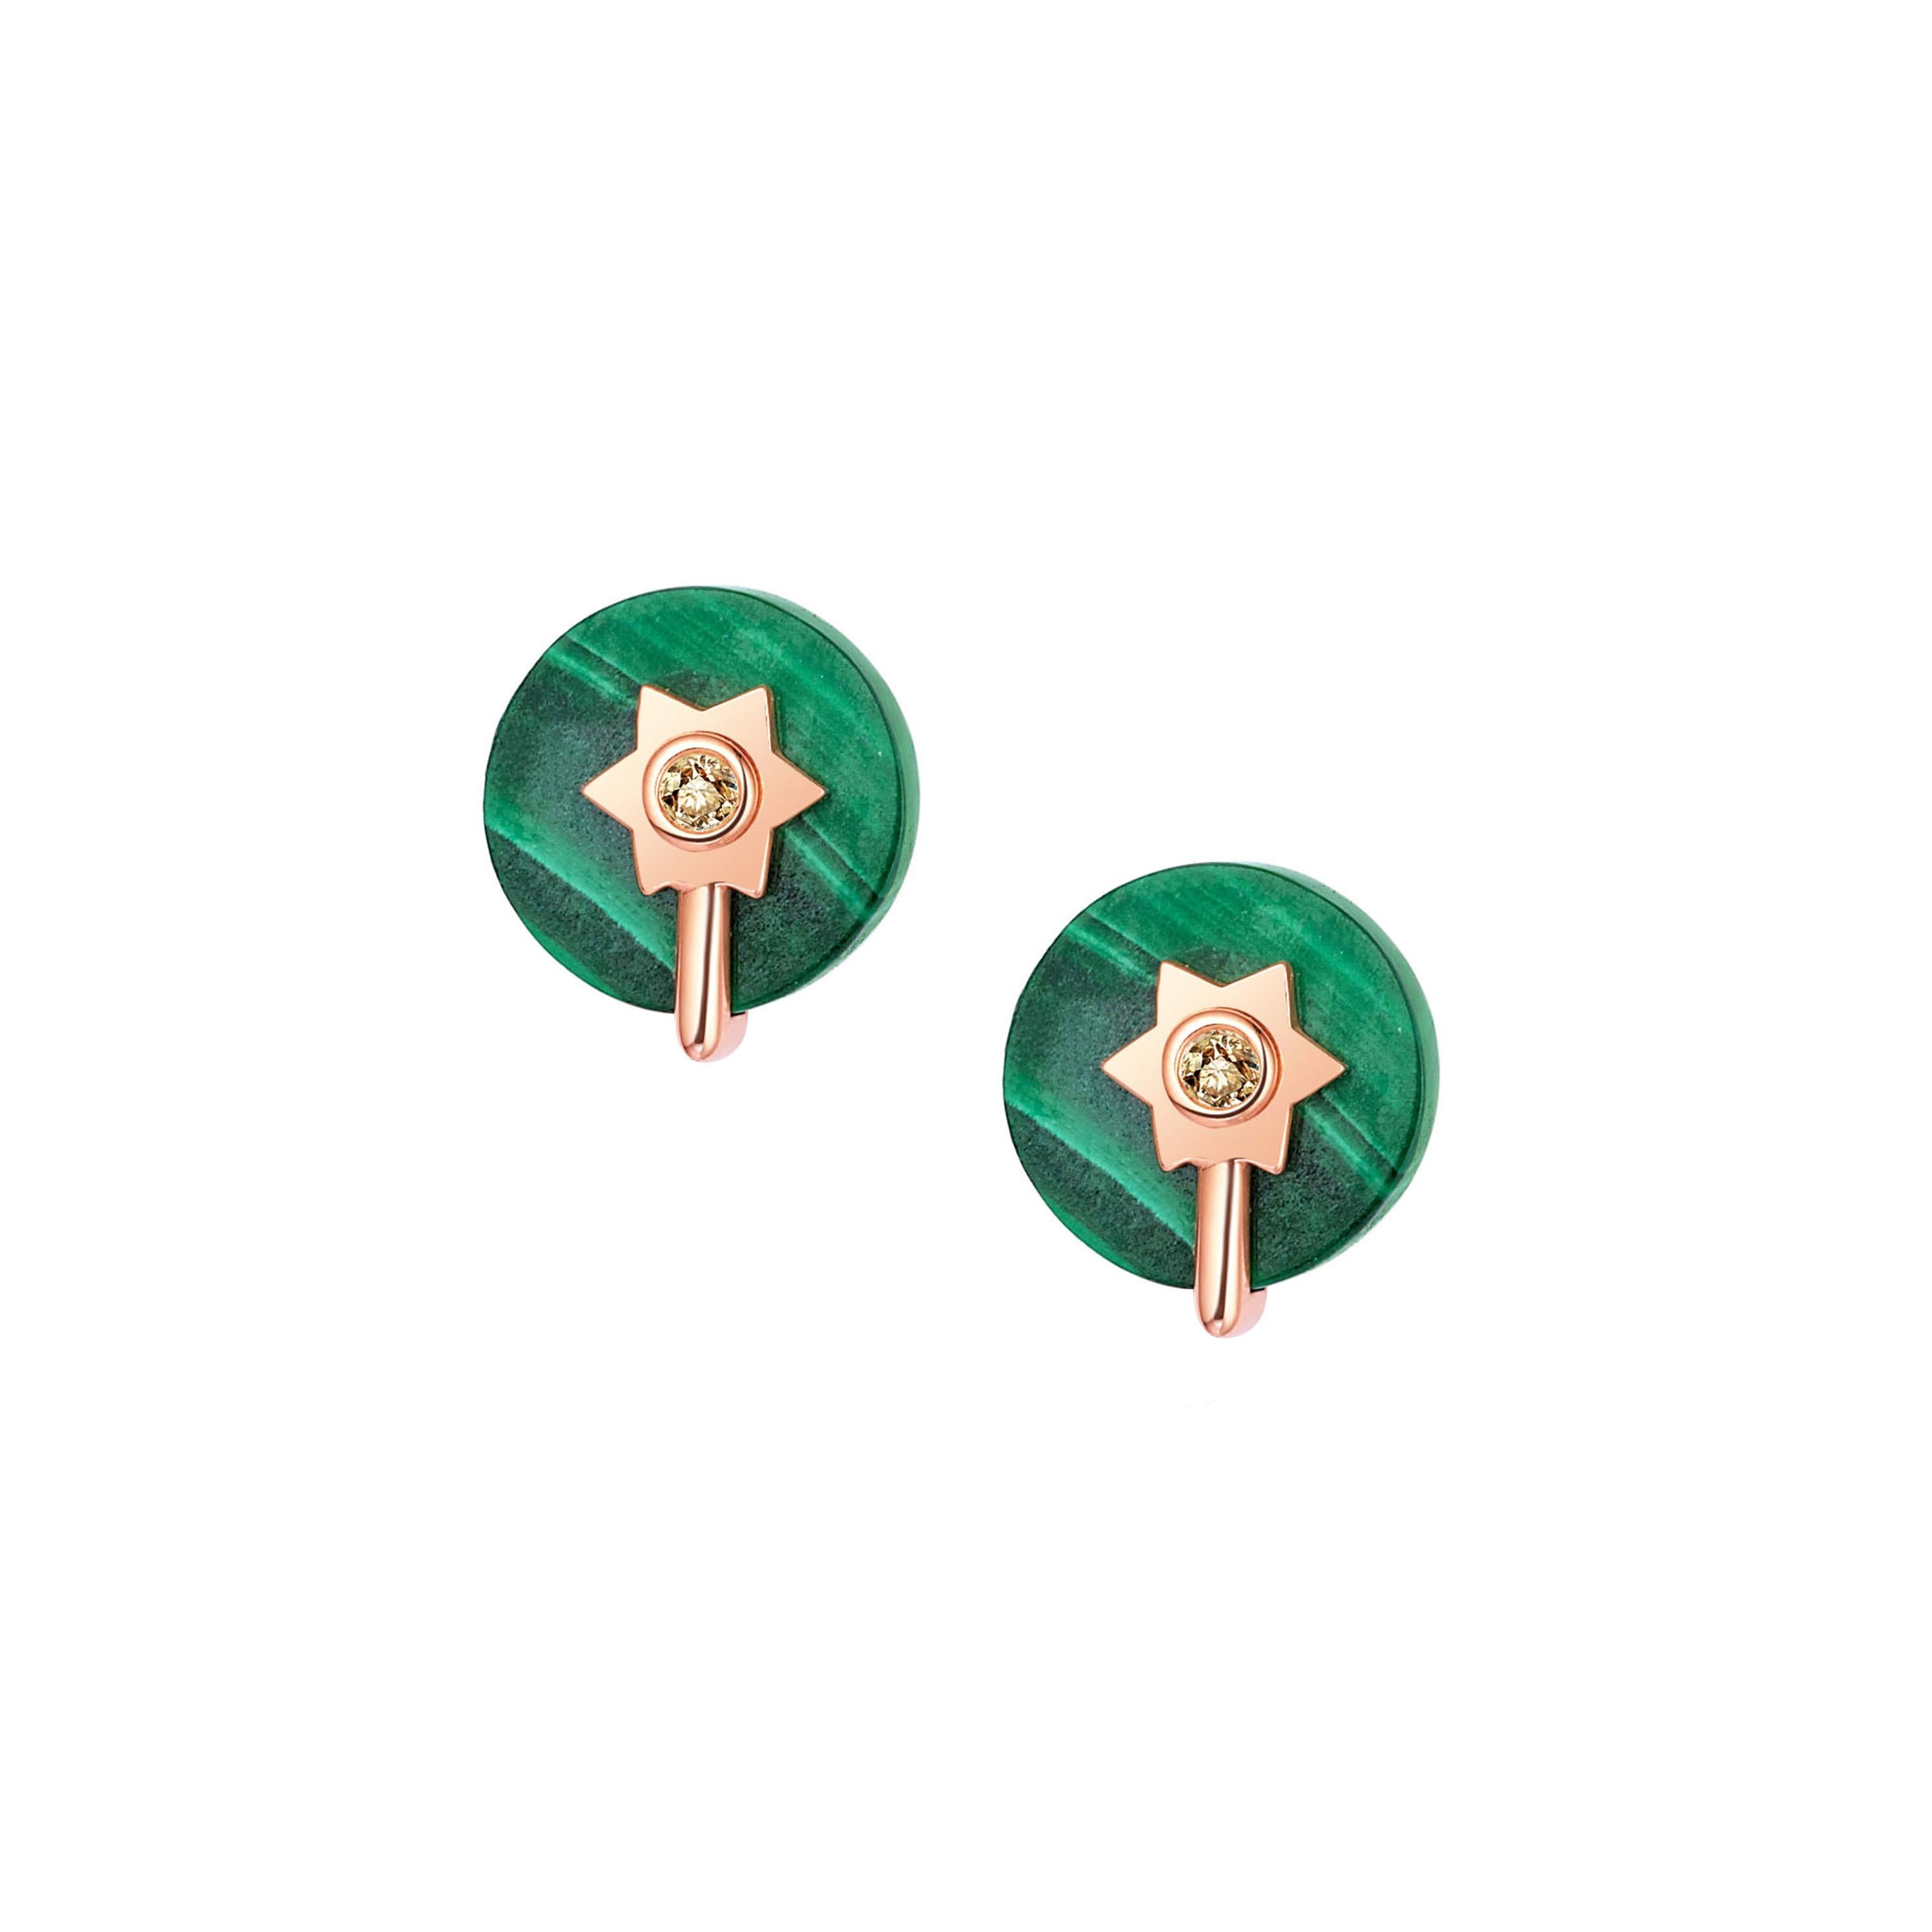 Description:
The Stella collection was inspired by the moon orbiting amongst the stars. Stella two-way wear earrings with spinning 10mm peacock green malachite and 0.042ct champagne diamond set in 14ct rose gold. Wear as dangle earrings, or detach